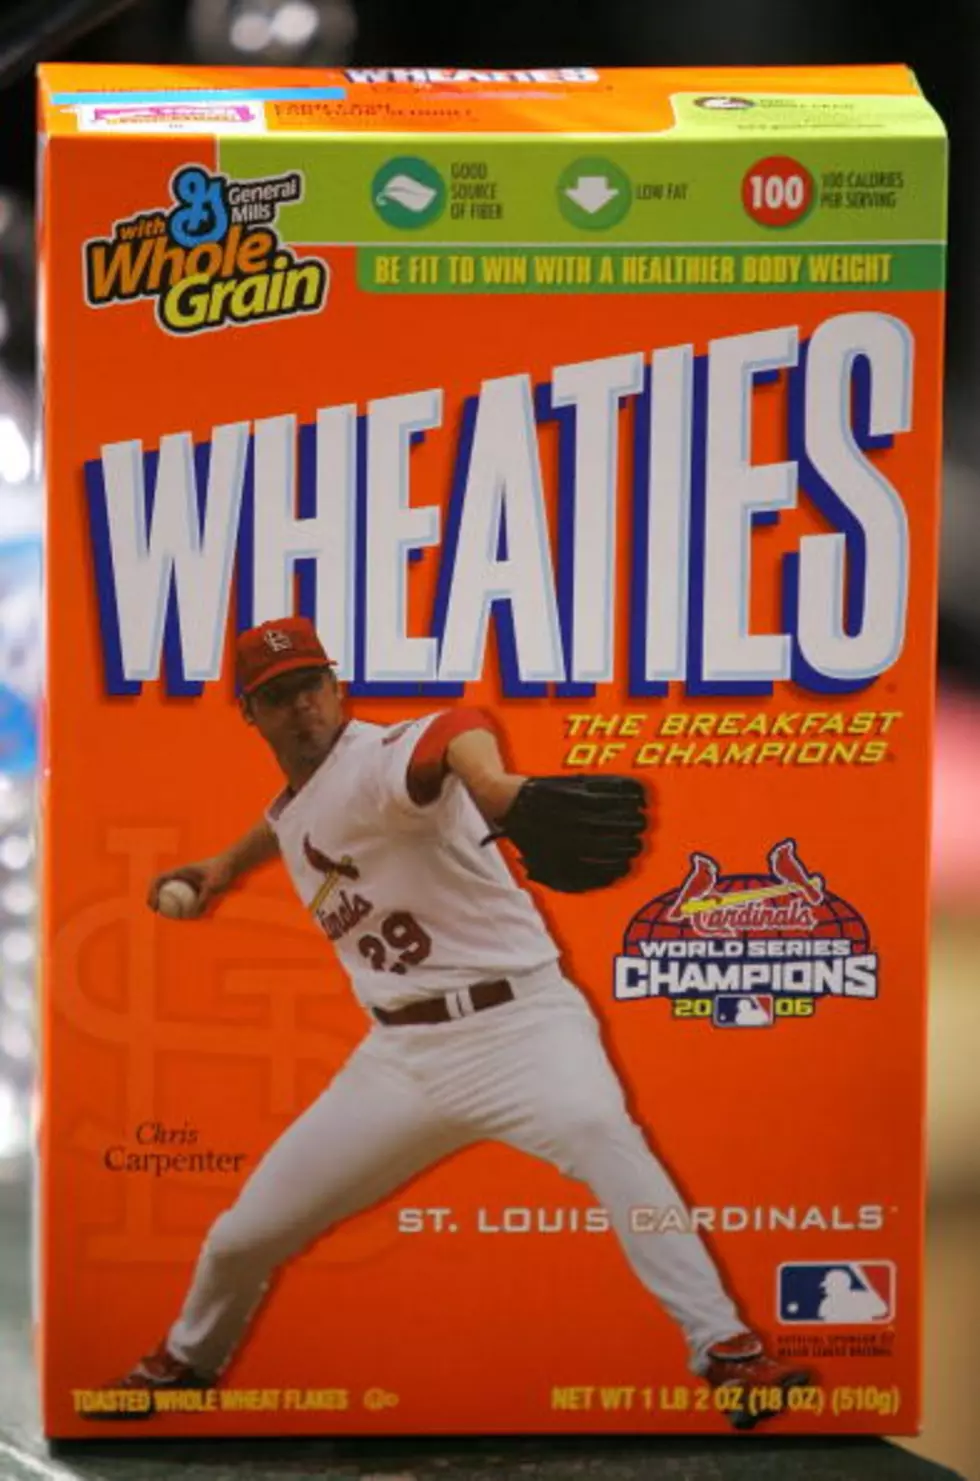 Why Wheaties cereal is struggling